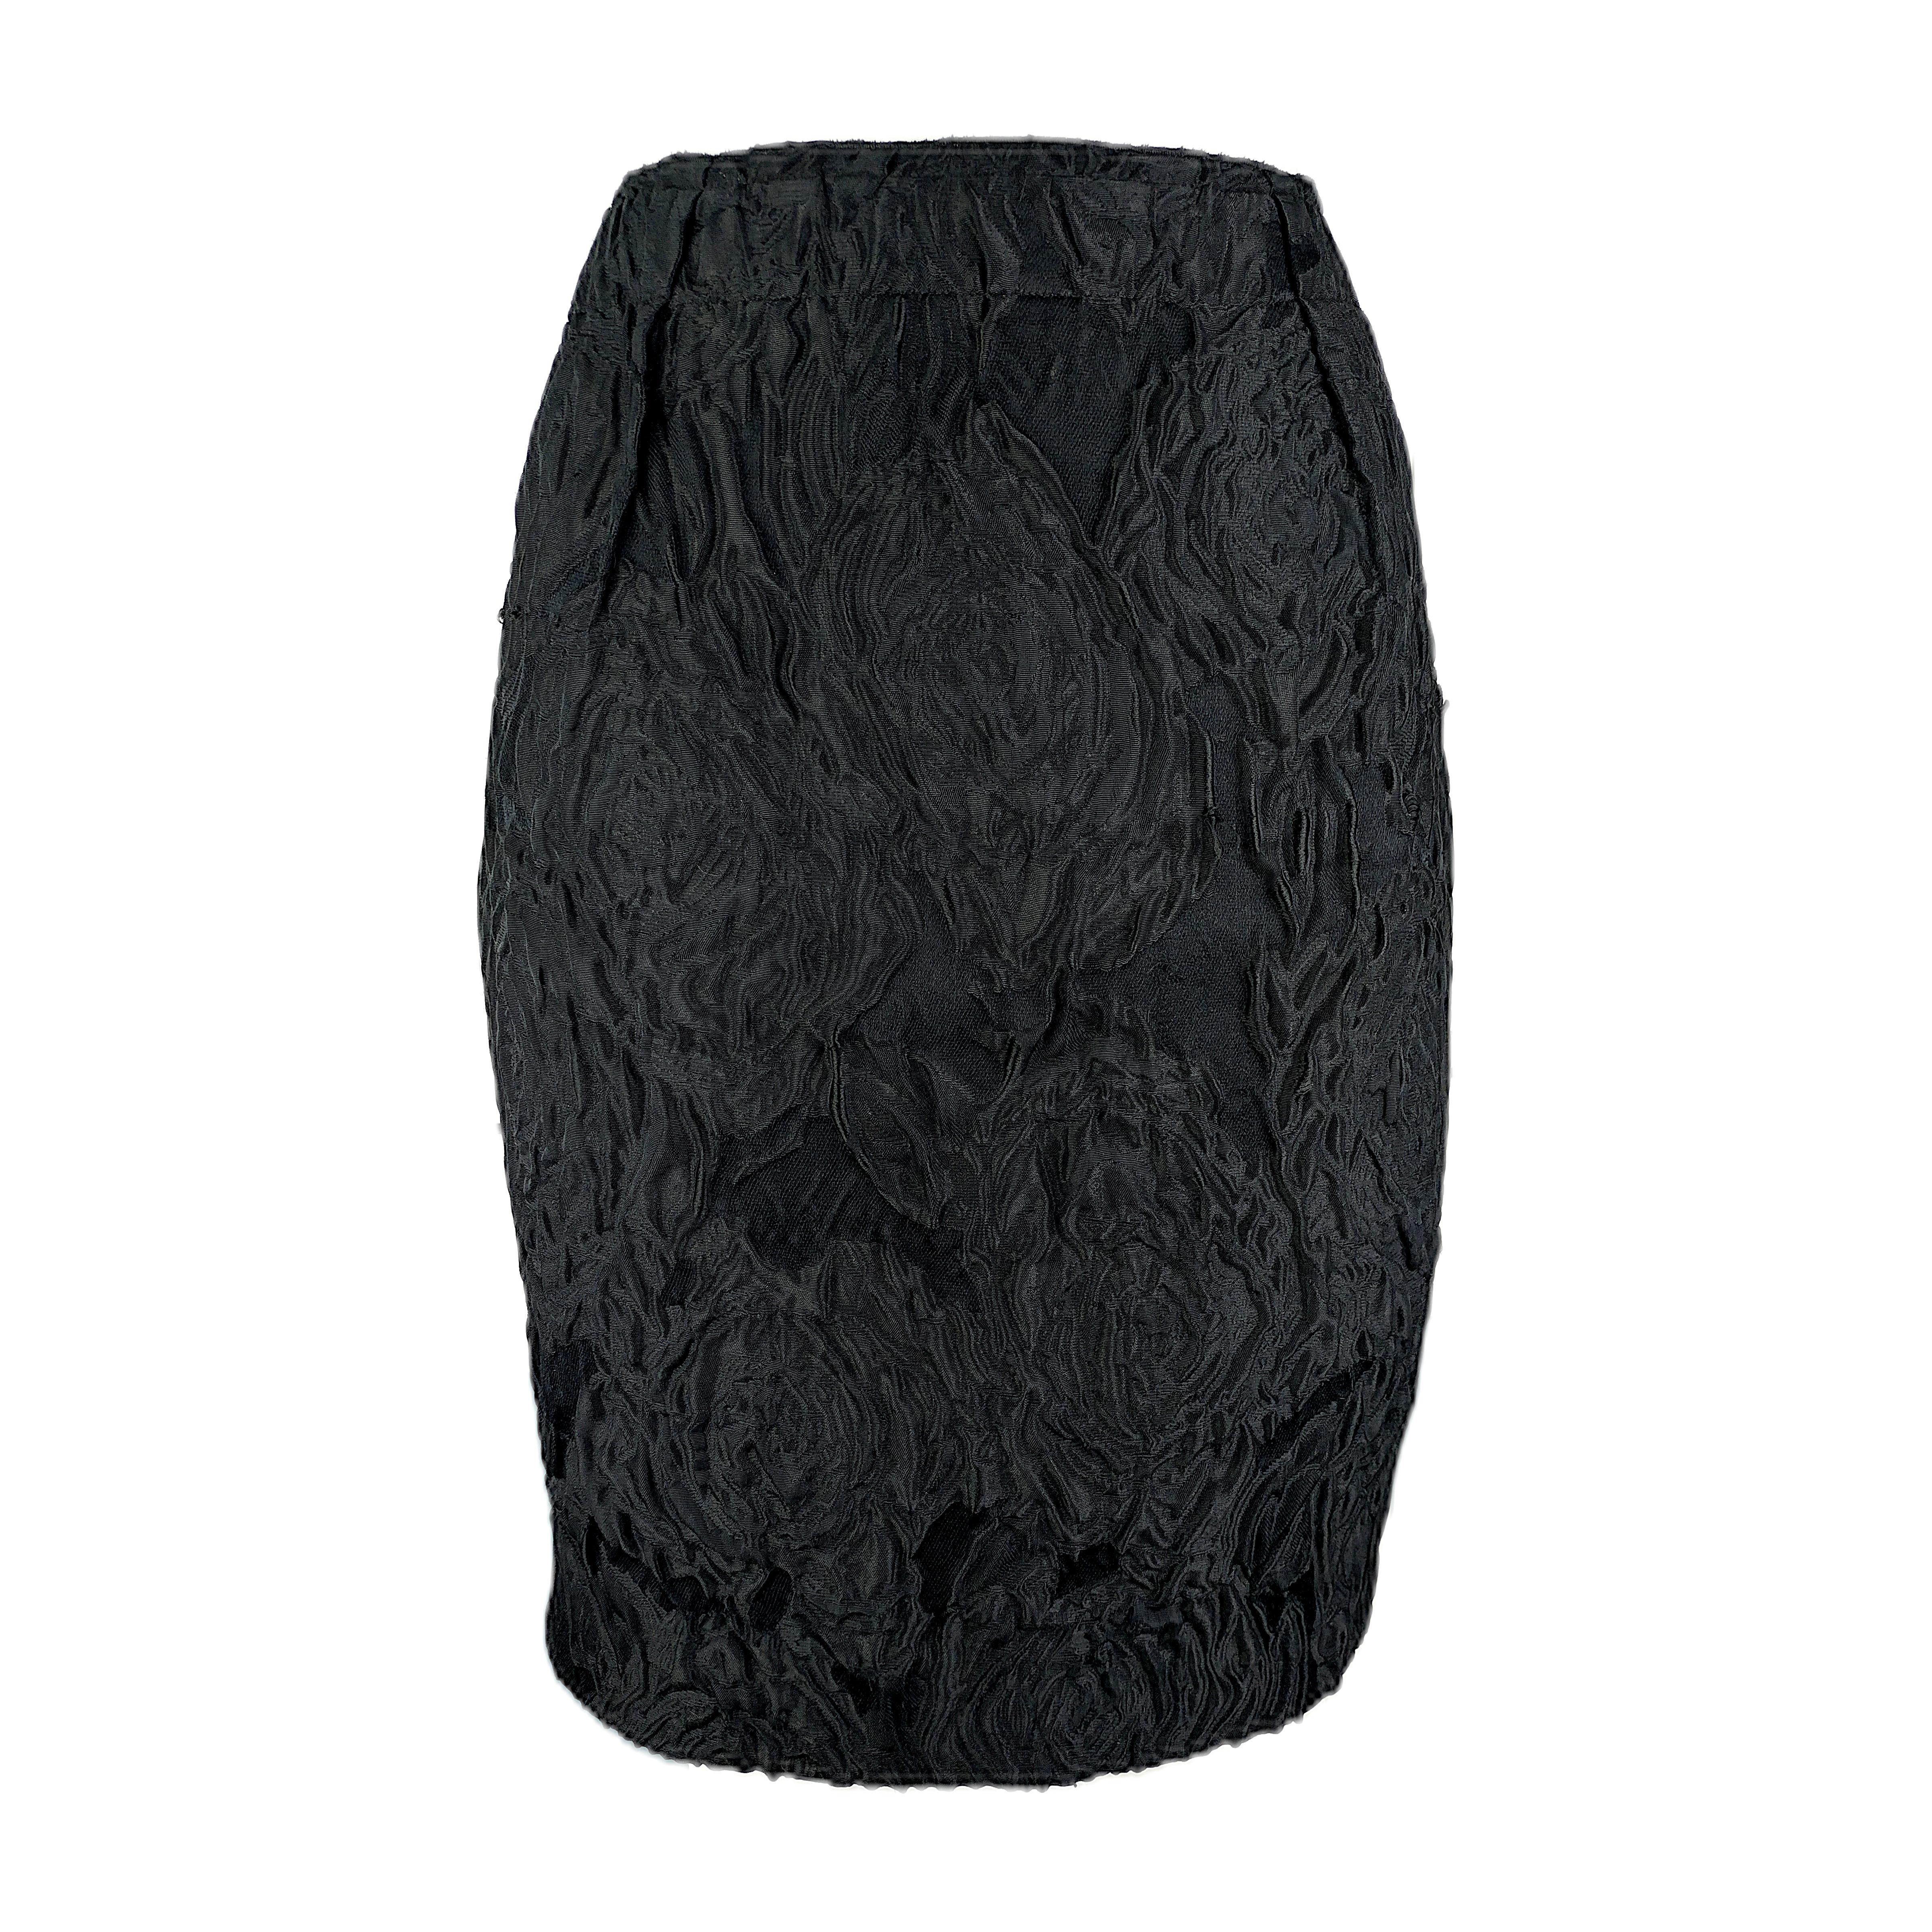 Women's LANVIN – Authentic Black Pencil Skirt from the SS '09 Runway  Size 8US 40EU